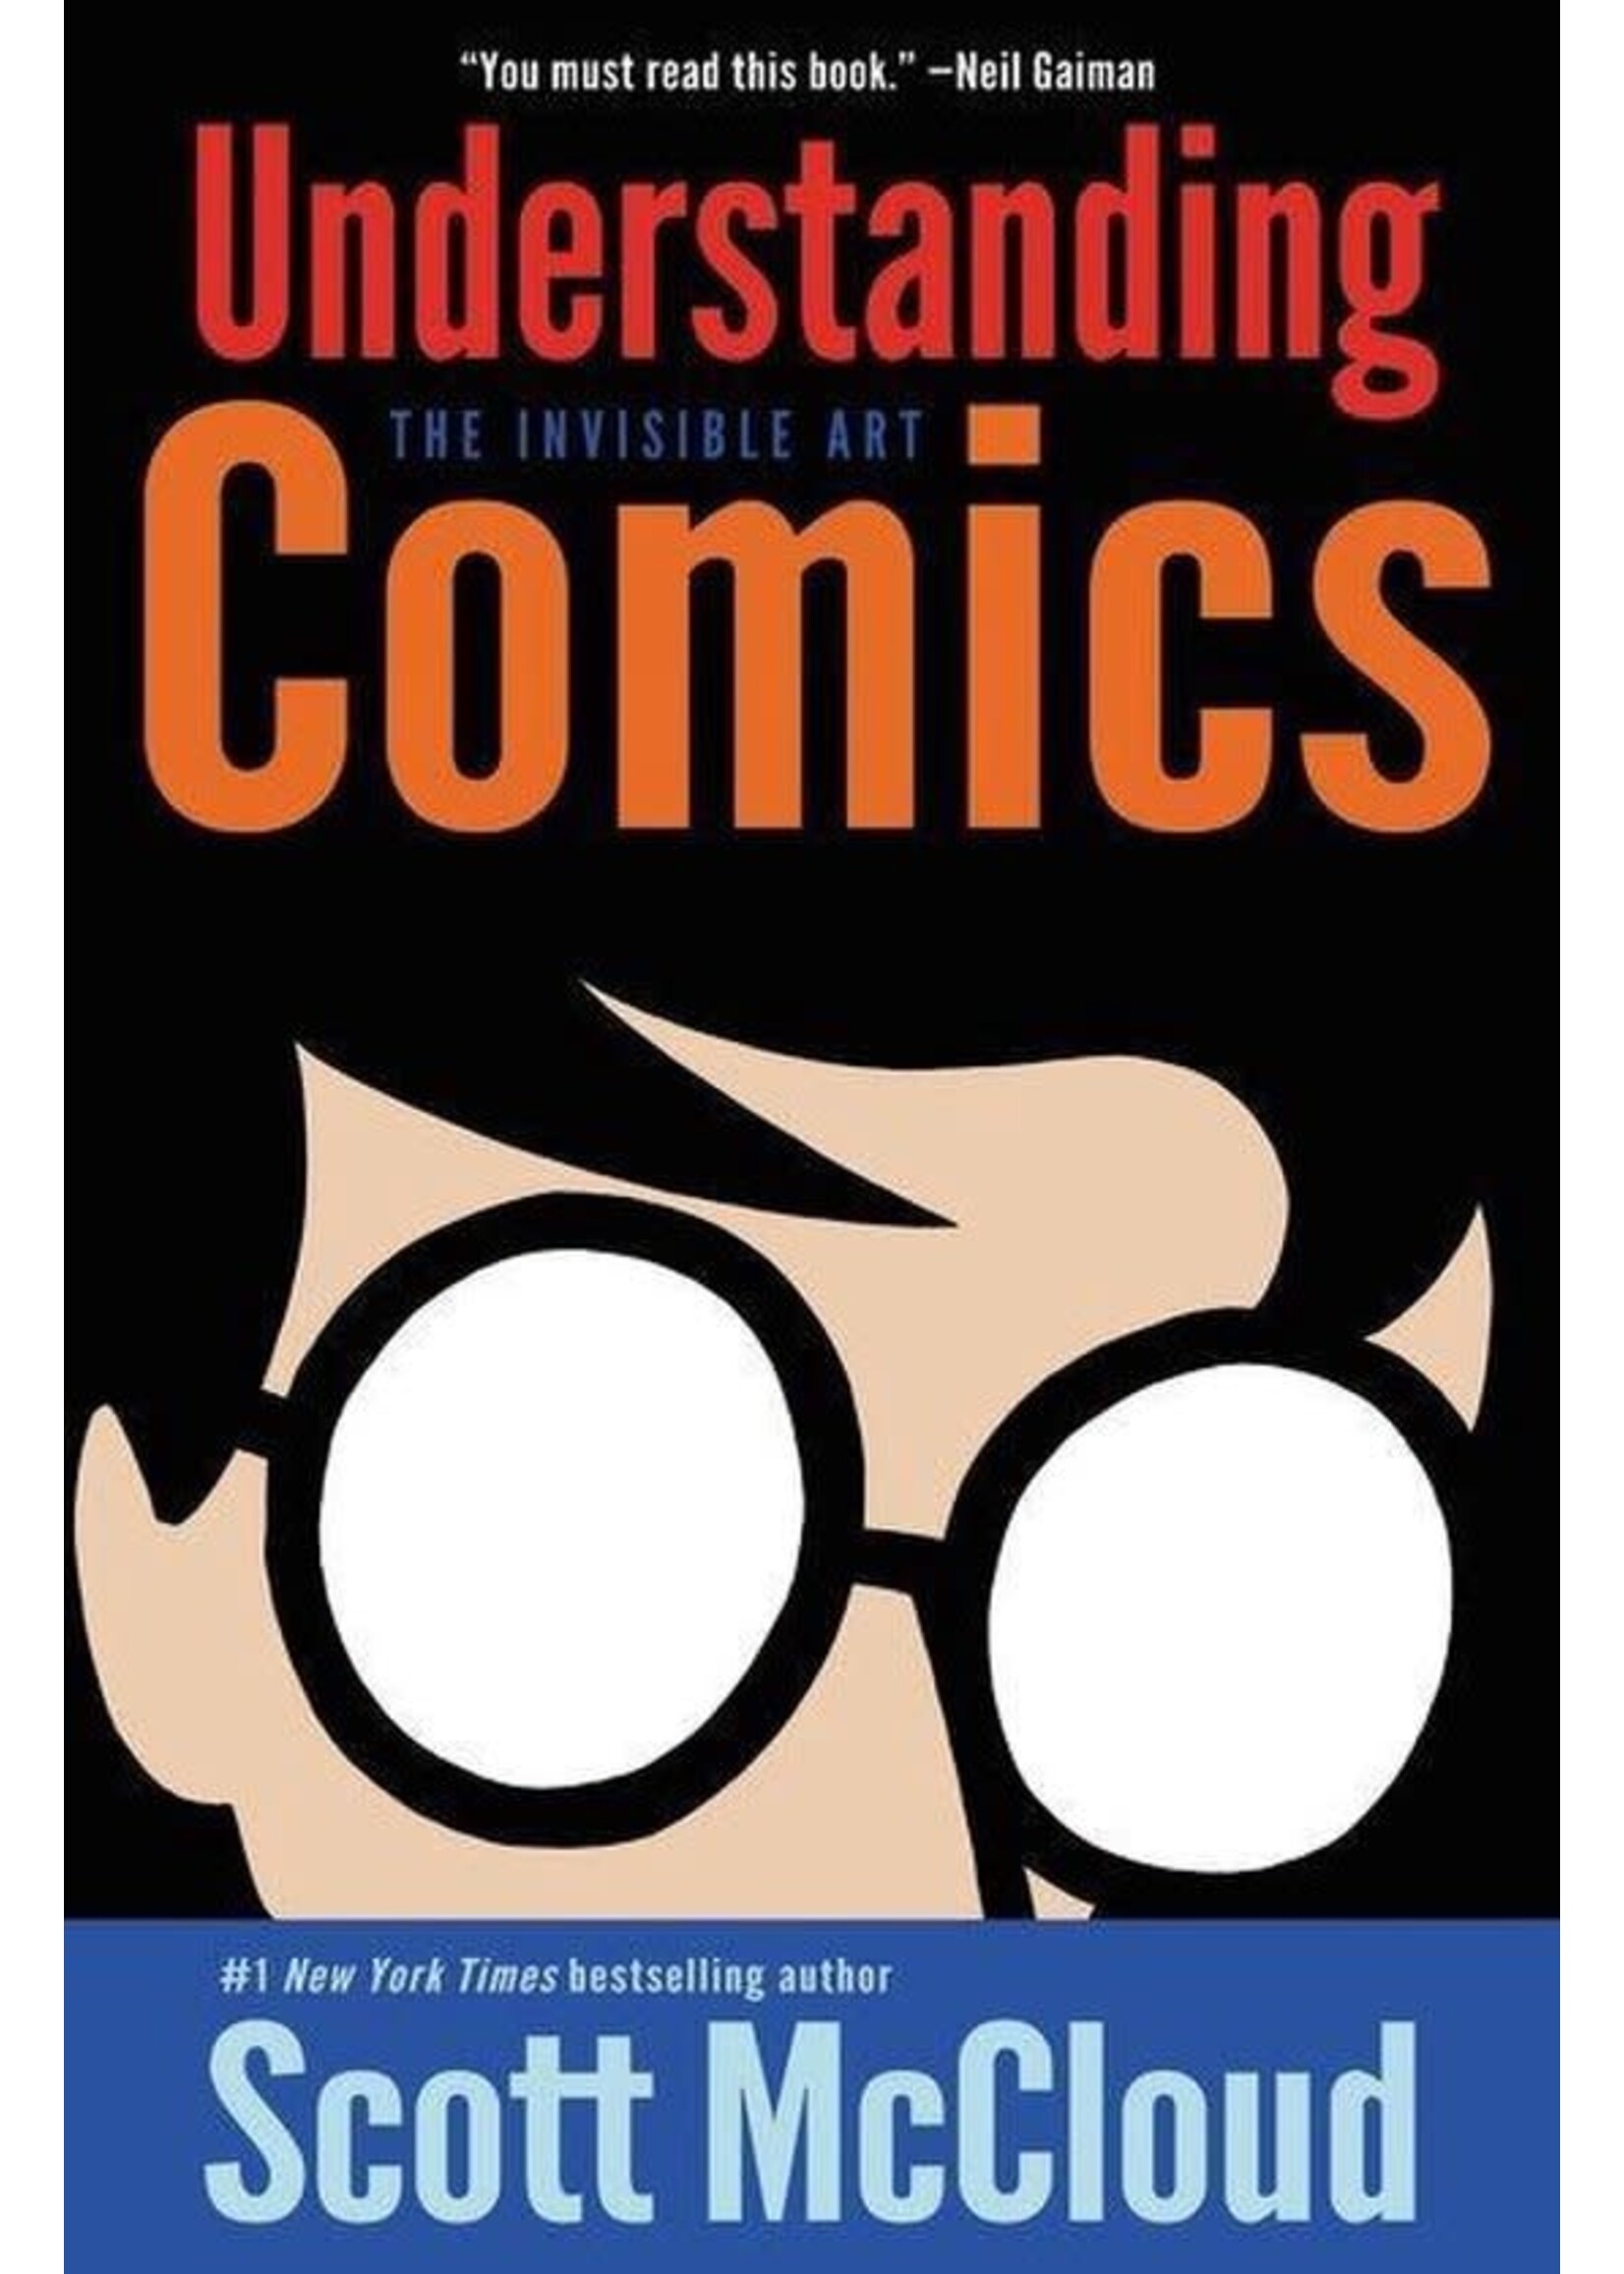 Understanding Comics: The Invisible Art (The Comic Books #1) by Scott McCloud